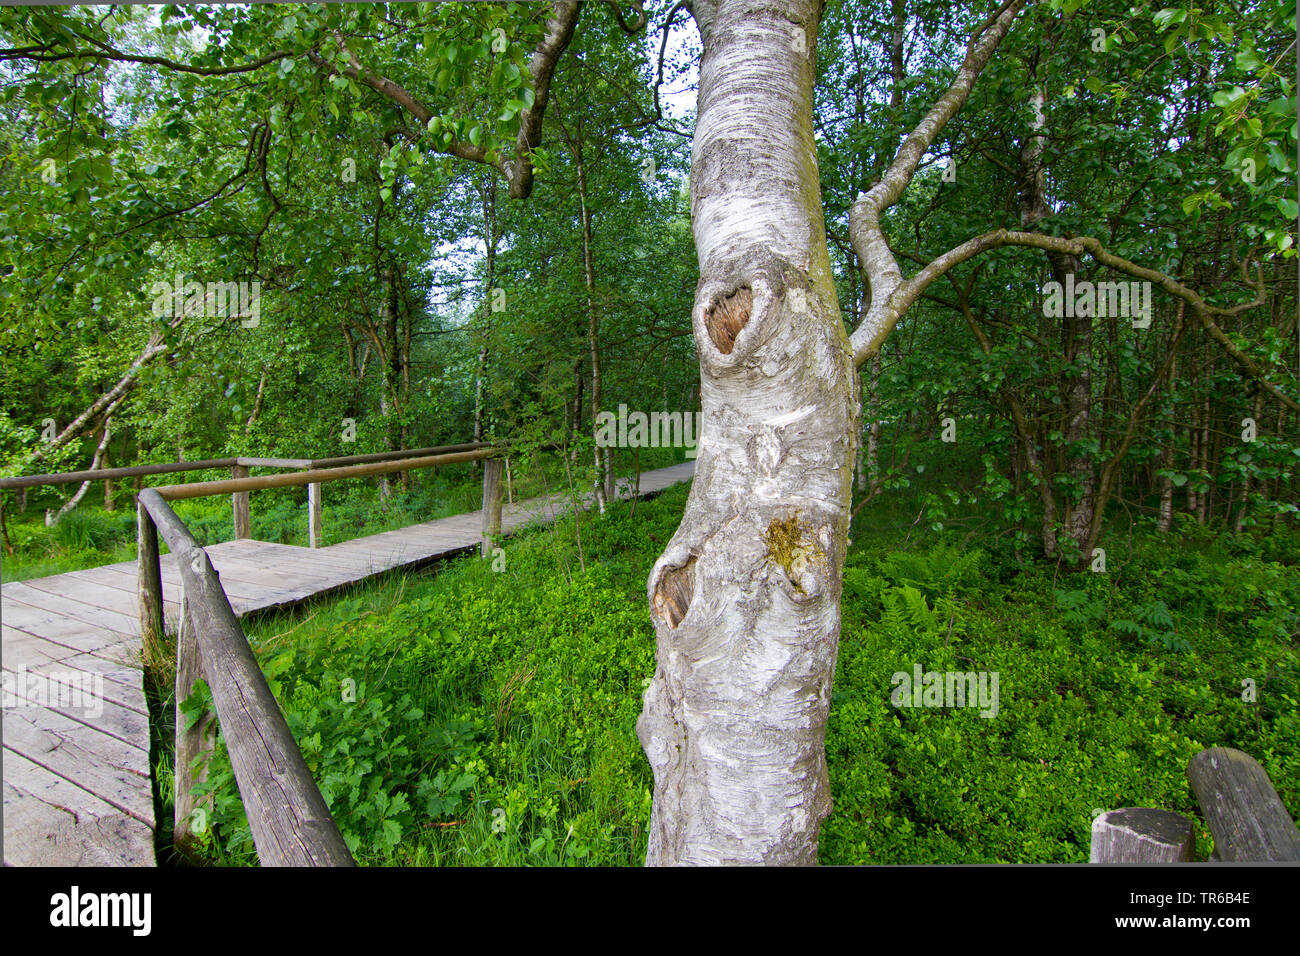 downy birch (Betula carpatica, Betula pubescens ssp. carpatica), at a boardwalk in the nature reserve Rotes Moor, Germany, Hesse, Rhoen Stock Photo